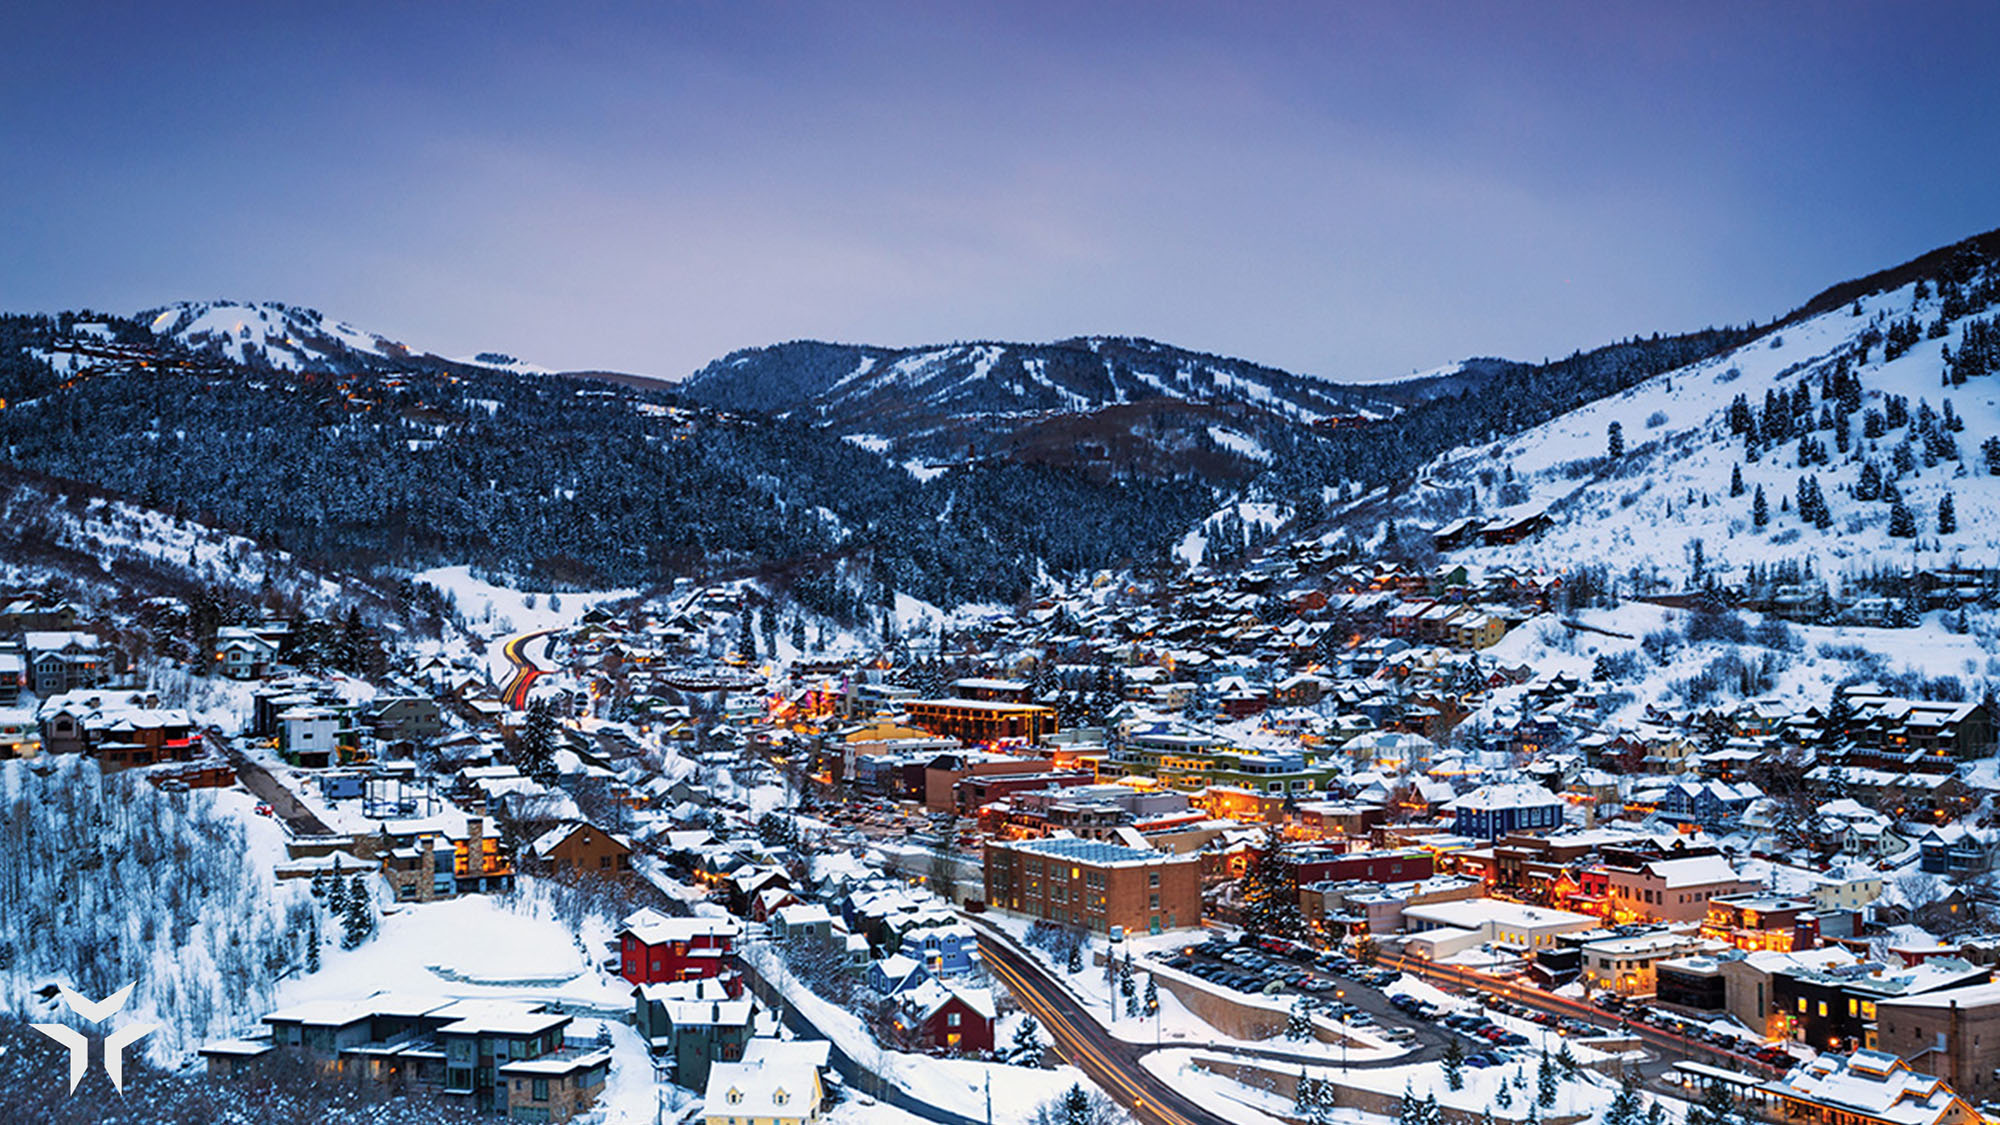 View of Park City in Summit County